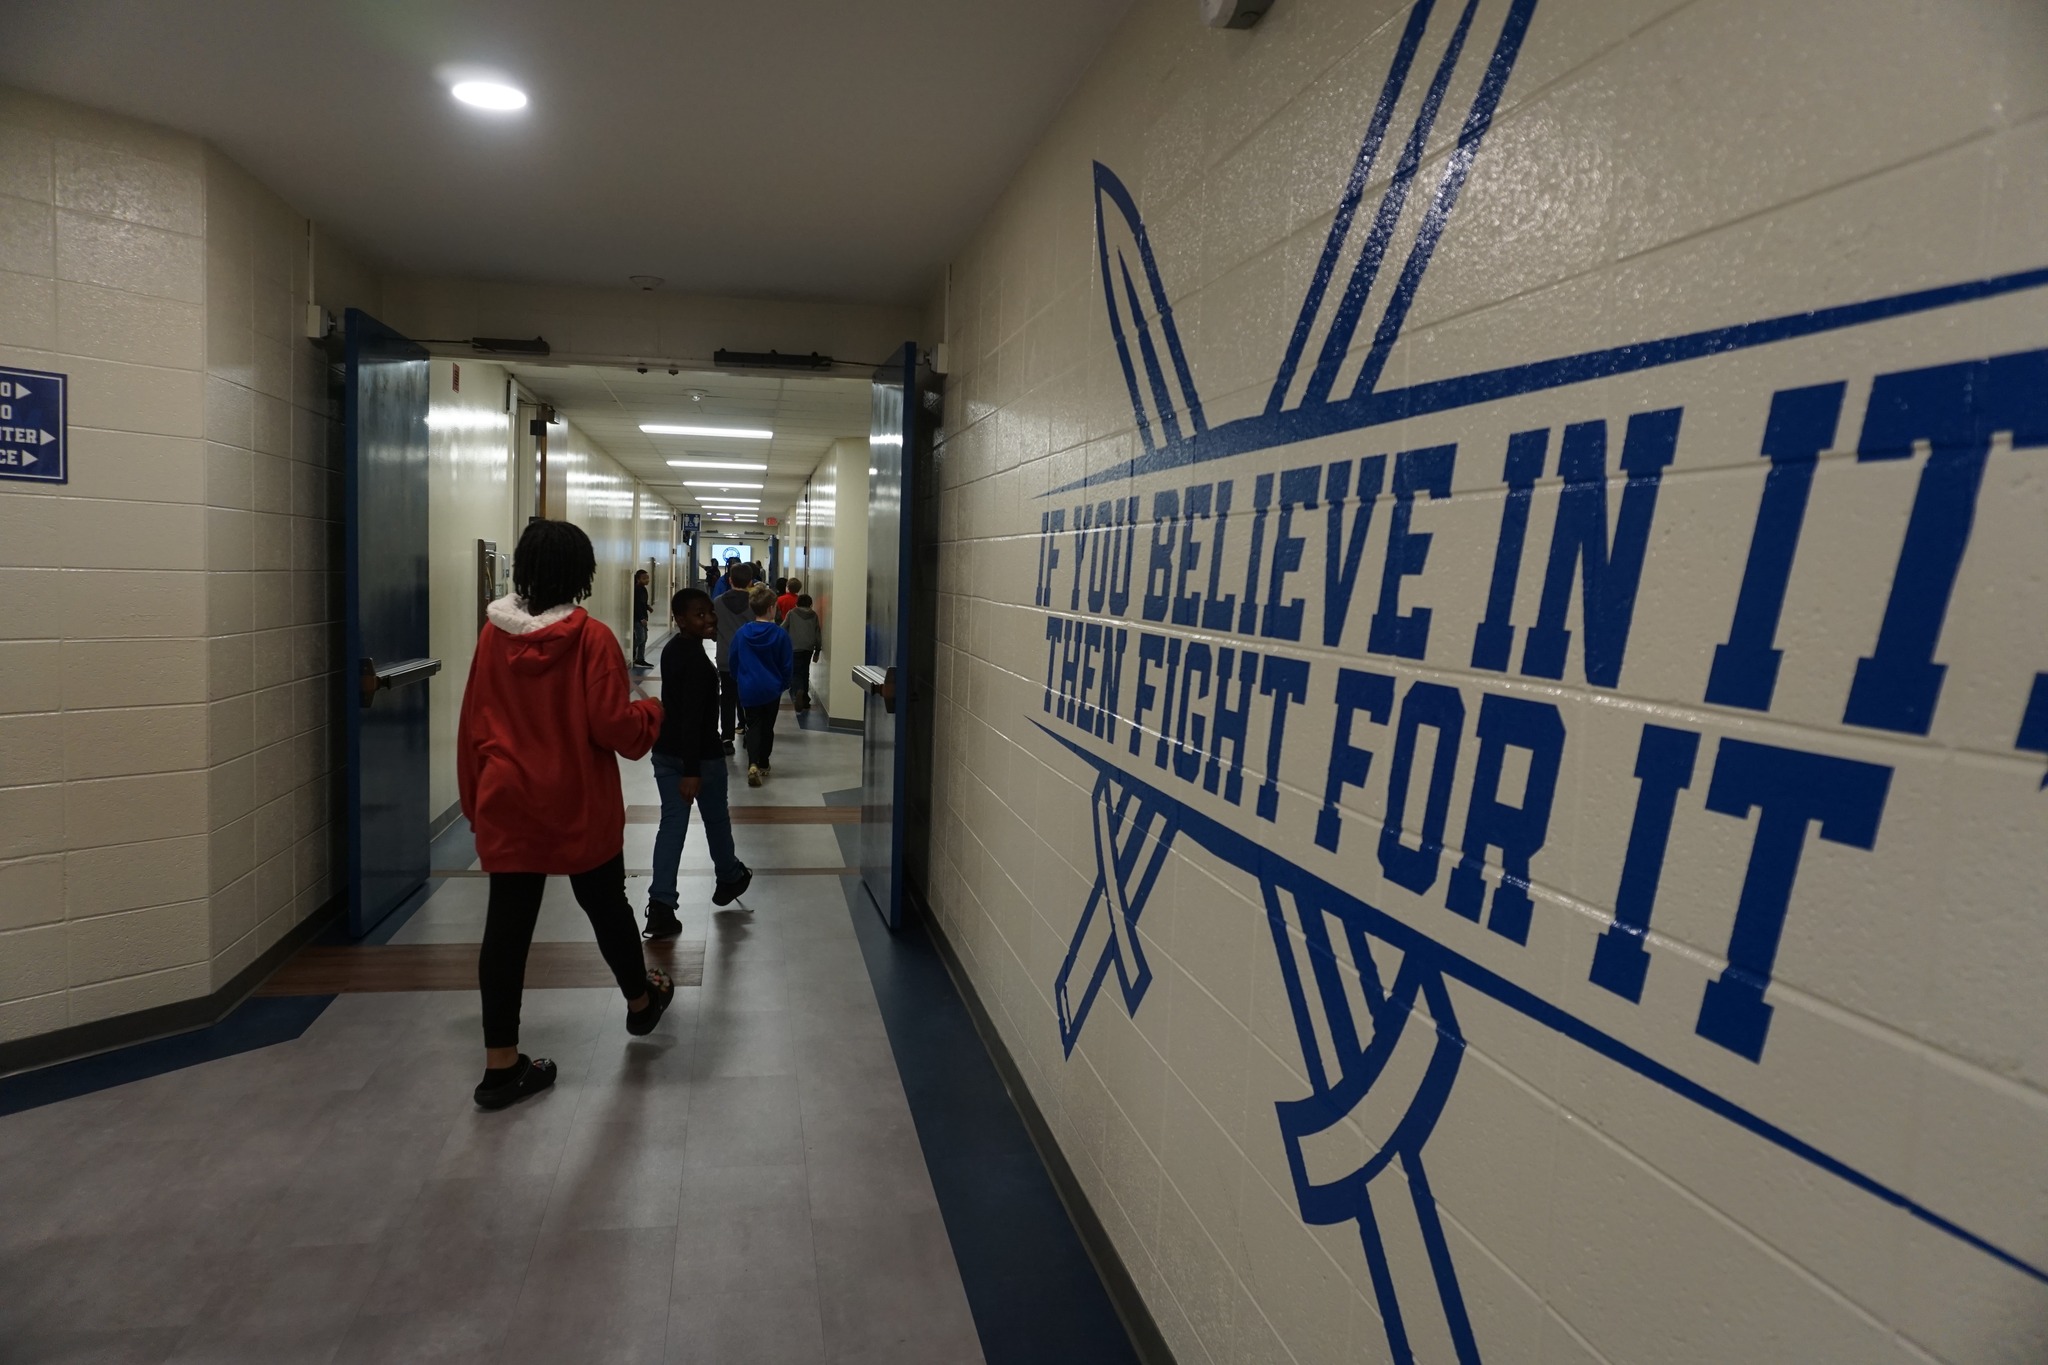 students in hallway with text "if you believe in it then fight for it"